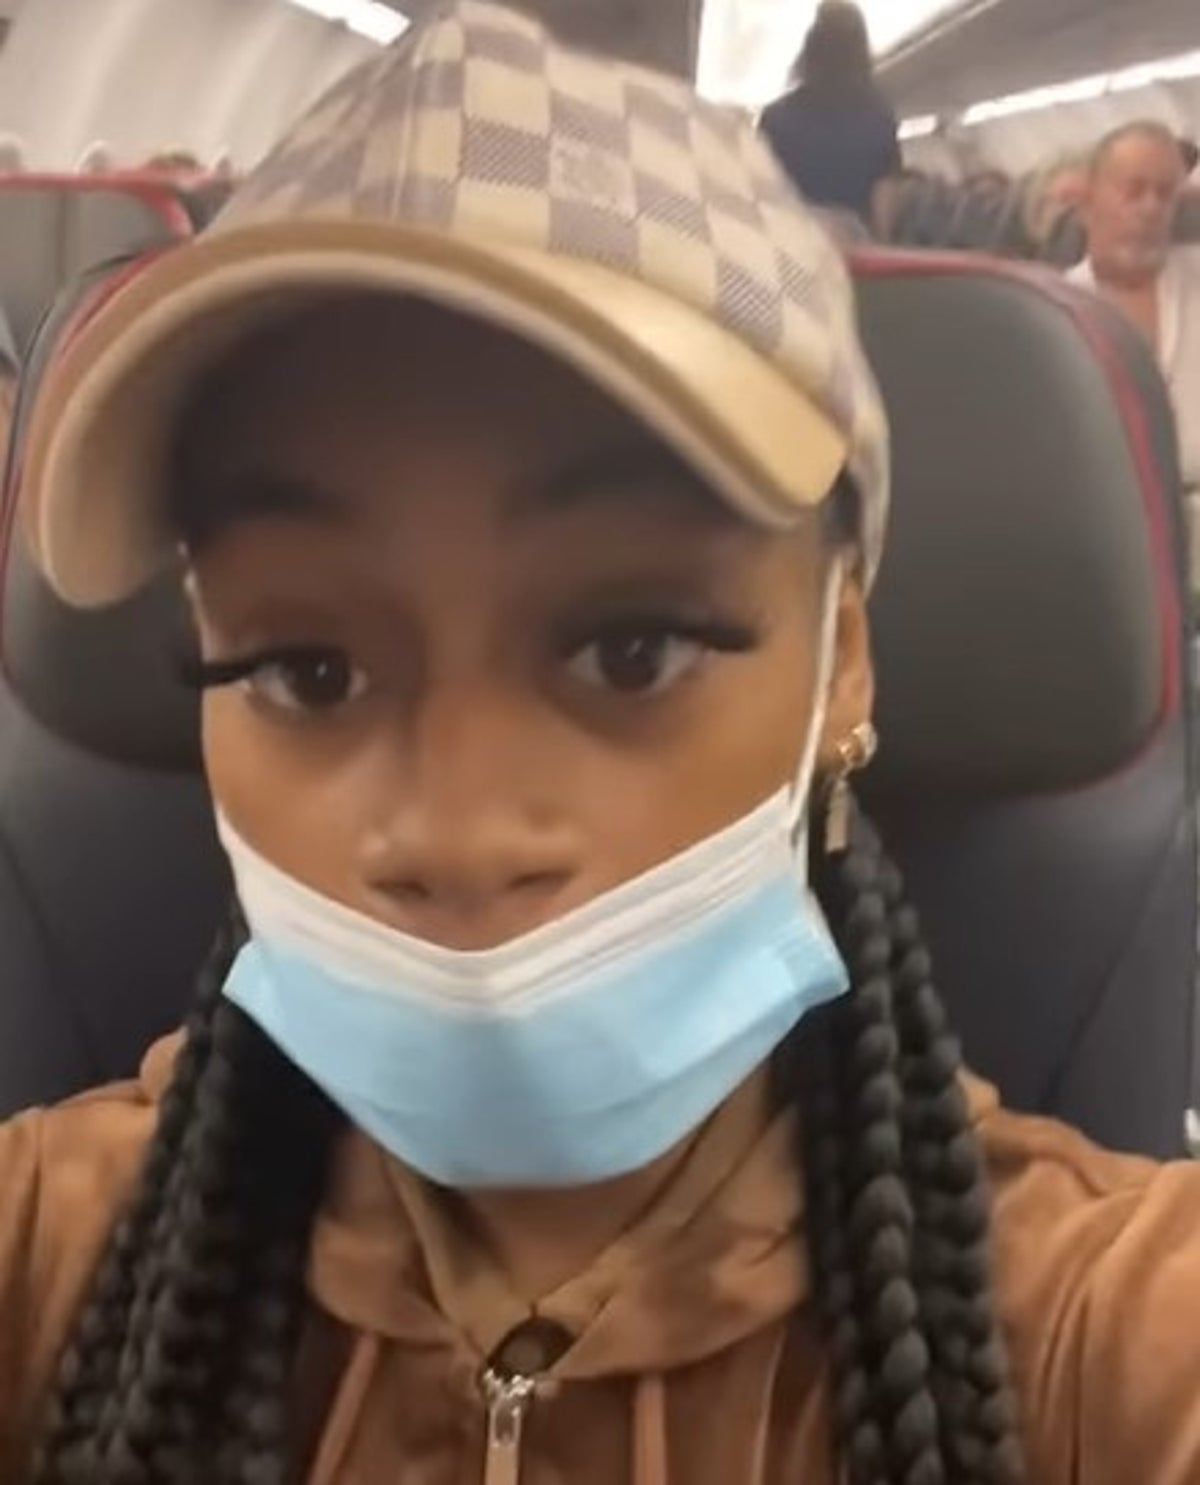 US athlete Sha’Carri Richardson removed from flight after she claims she was ‘harassed’ by flight attendant